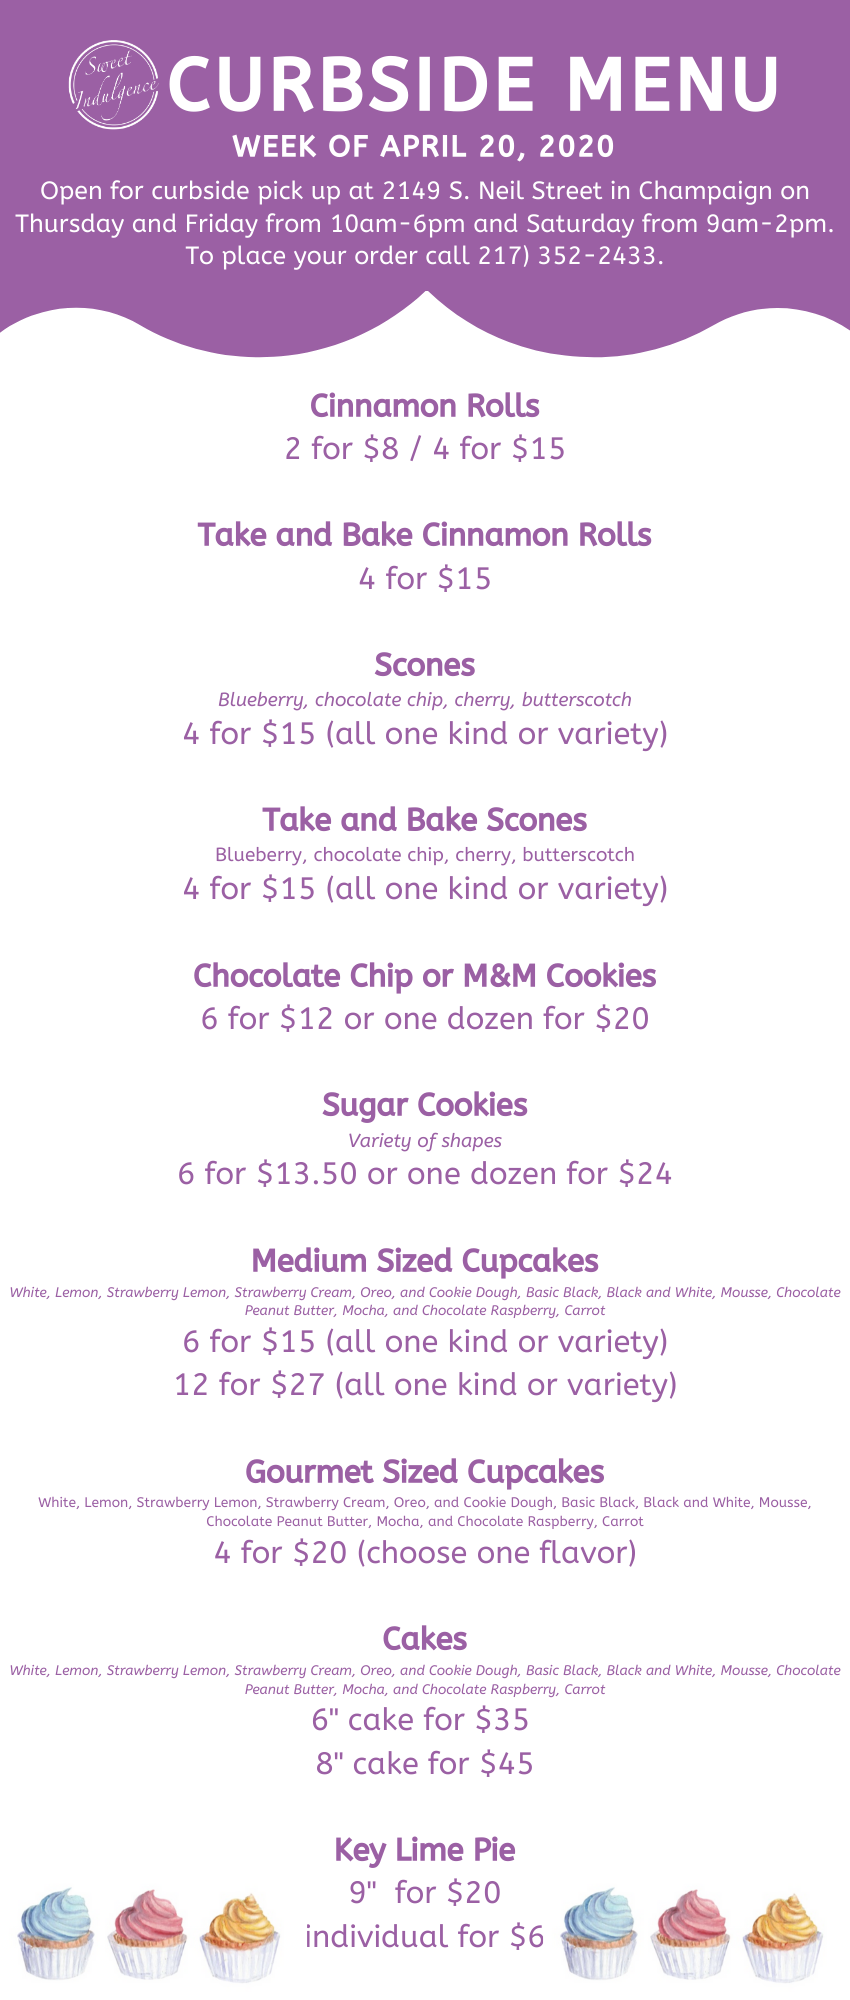 IMAGE: Menu featuring various items from Sweet Indulgence Bakery, with prices.